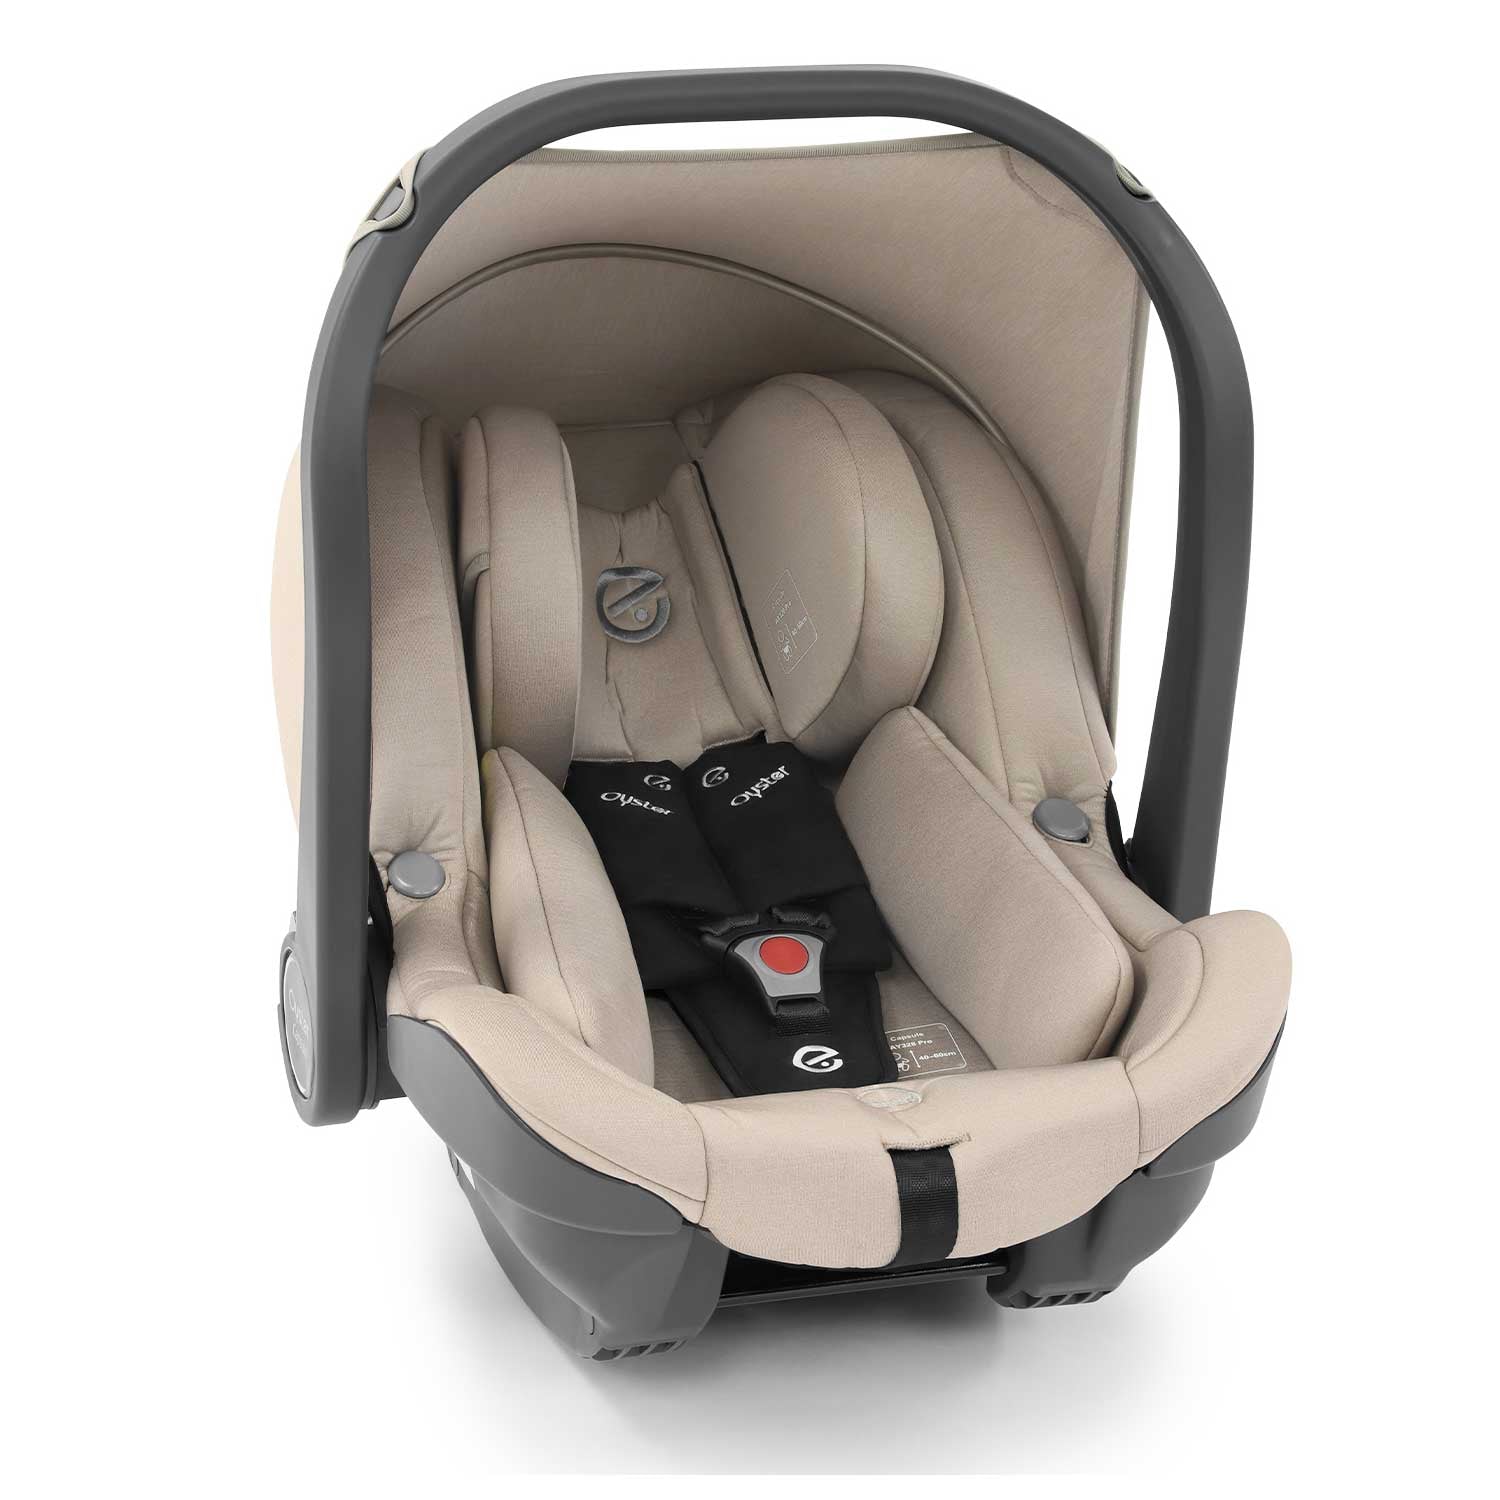 Babystyle Oyster Capsule Group 0+ Infant i-Size Car Seat - Creme Brulee - For Your Little One